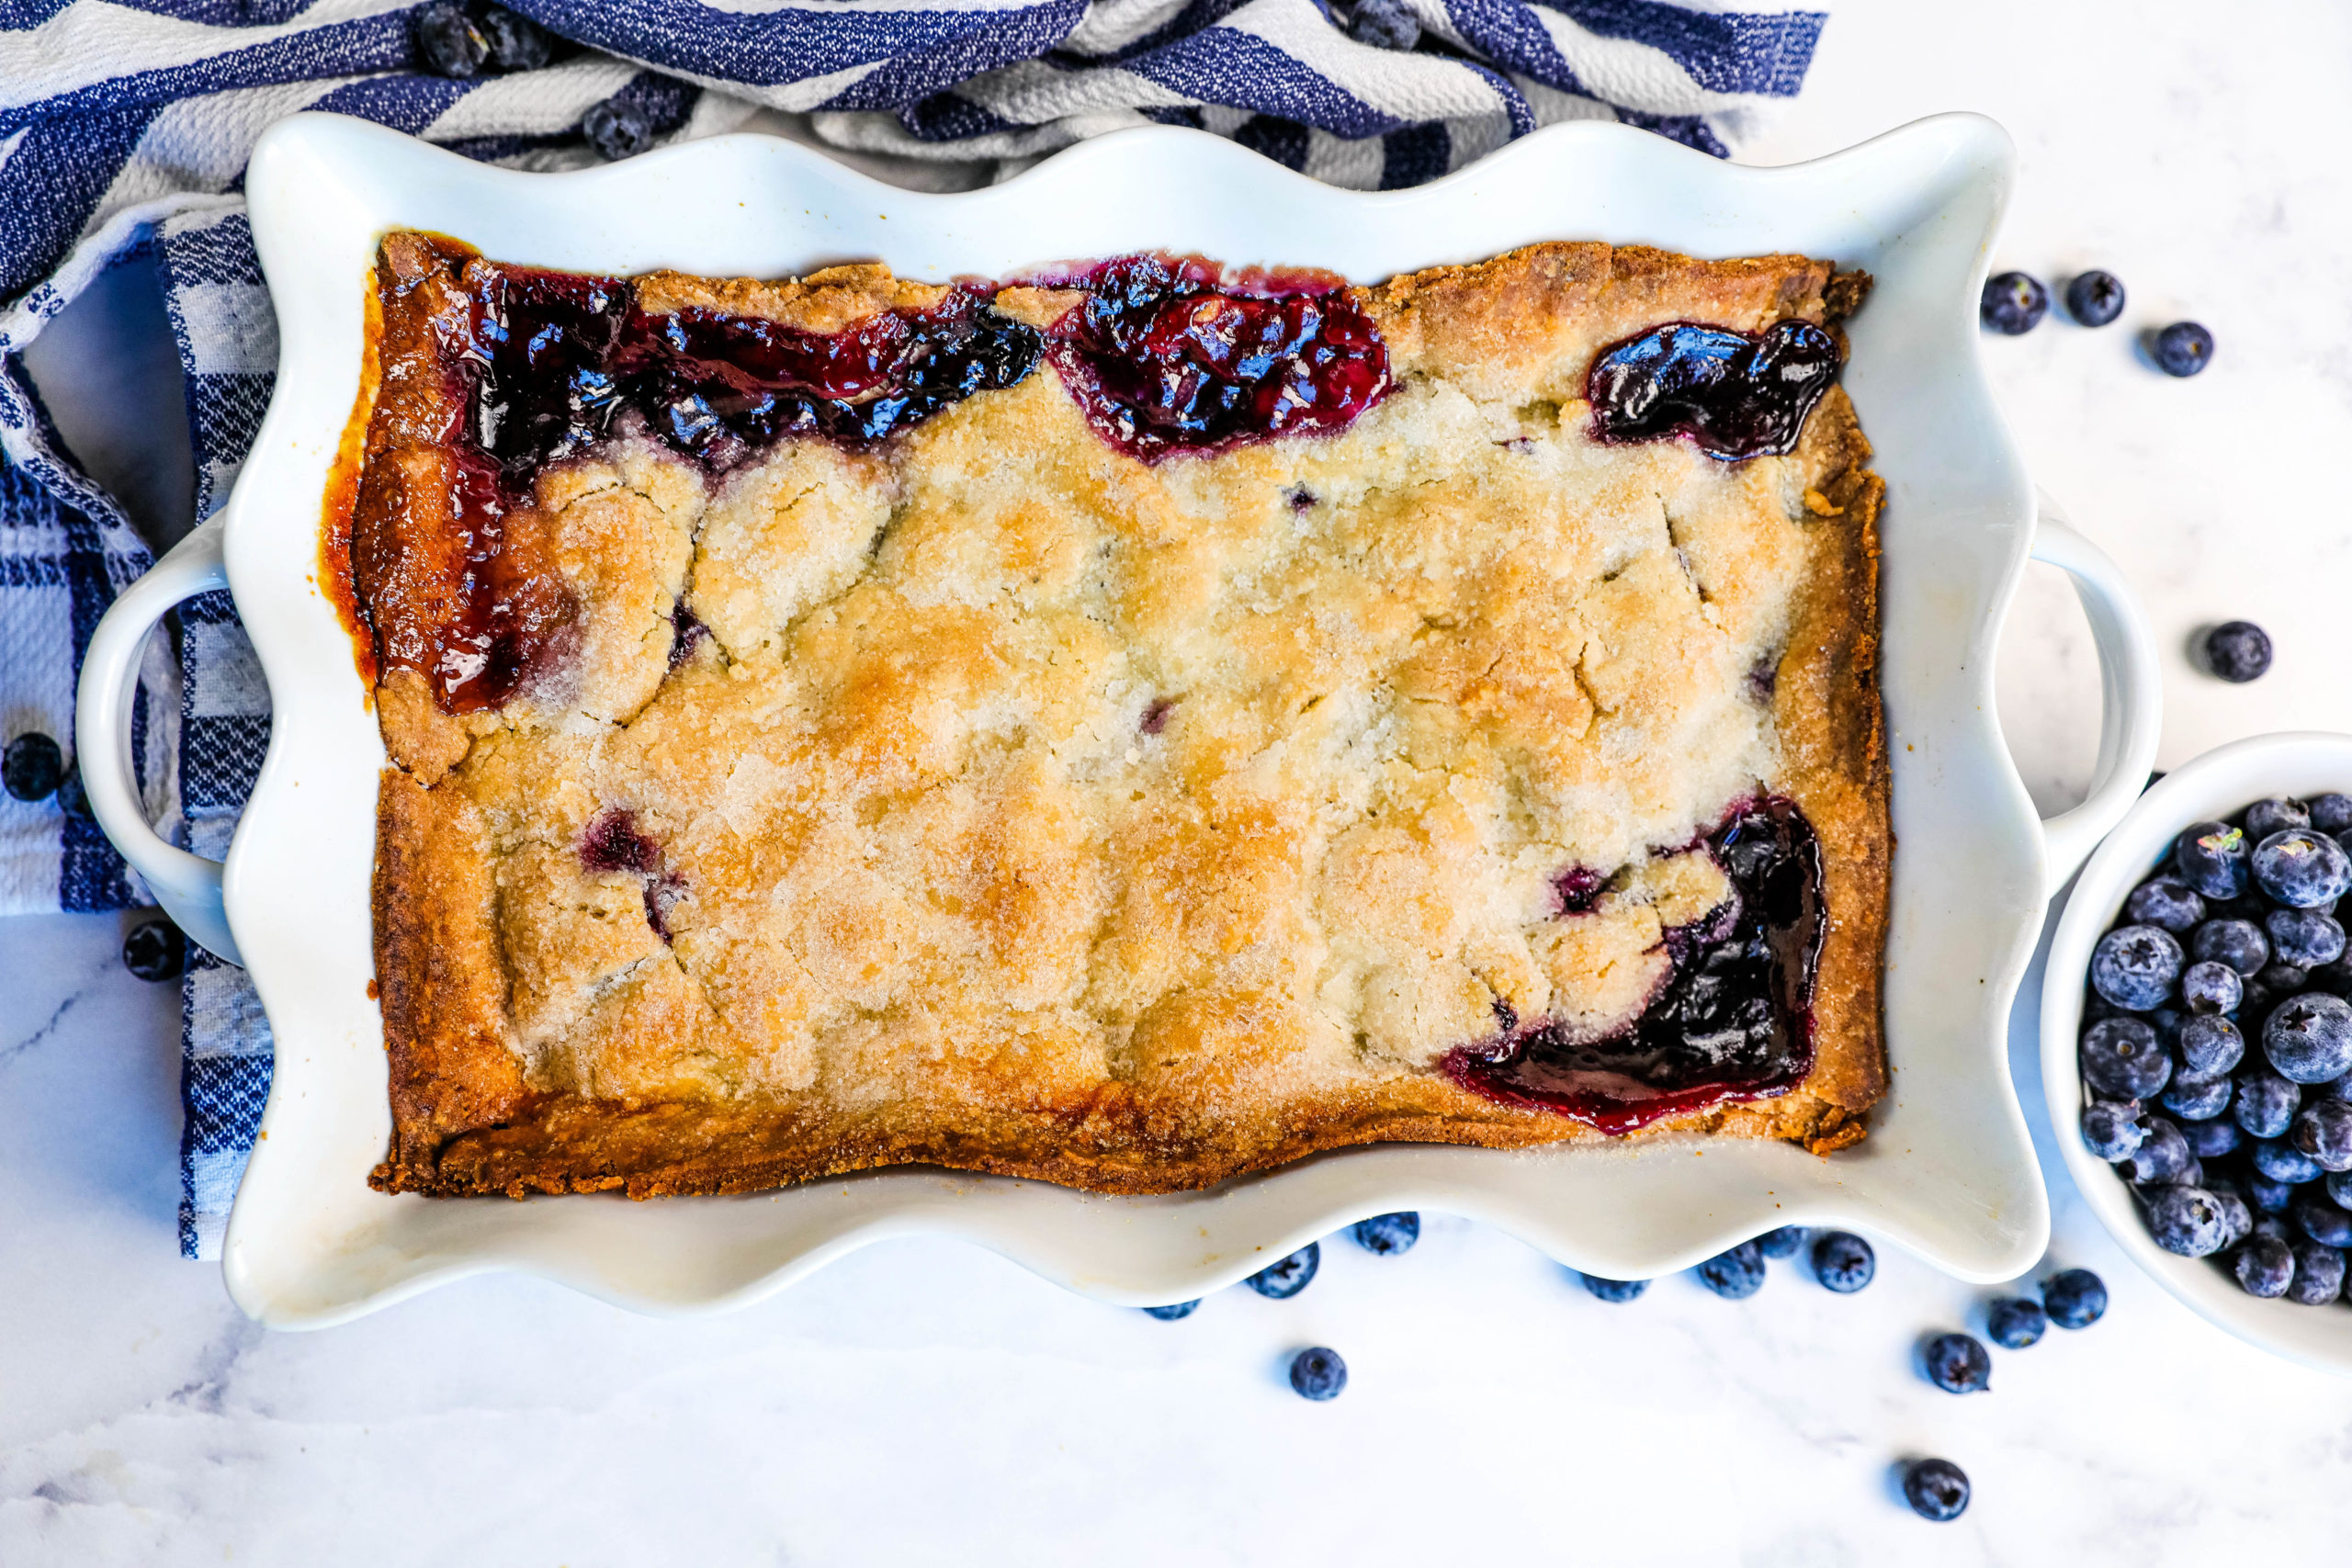 Blueberry Desserts Are Perfect for Summer